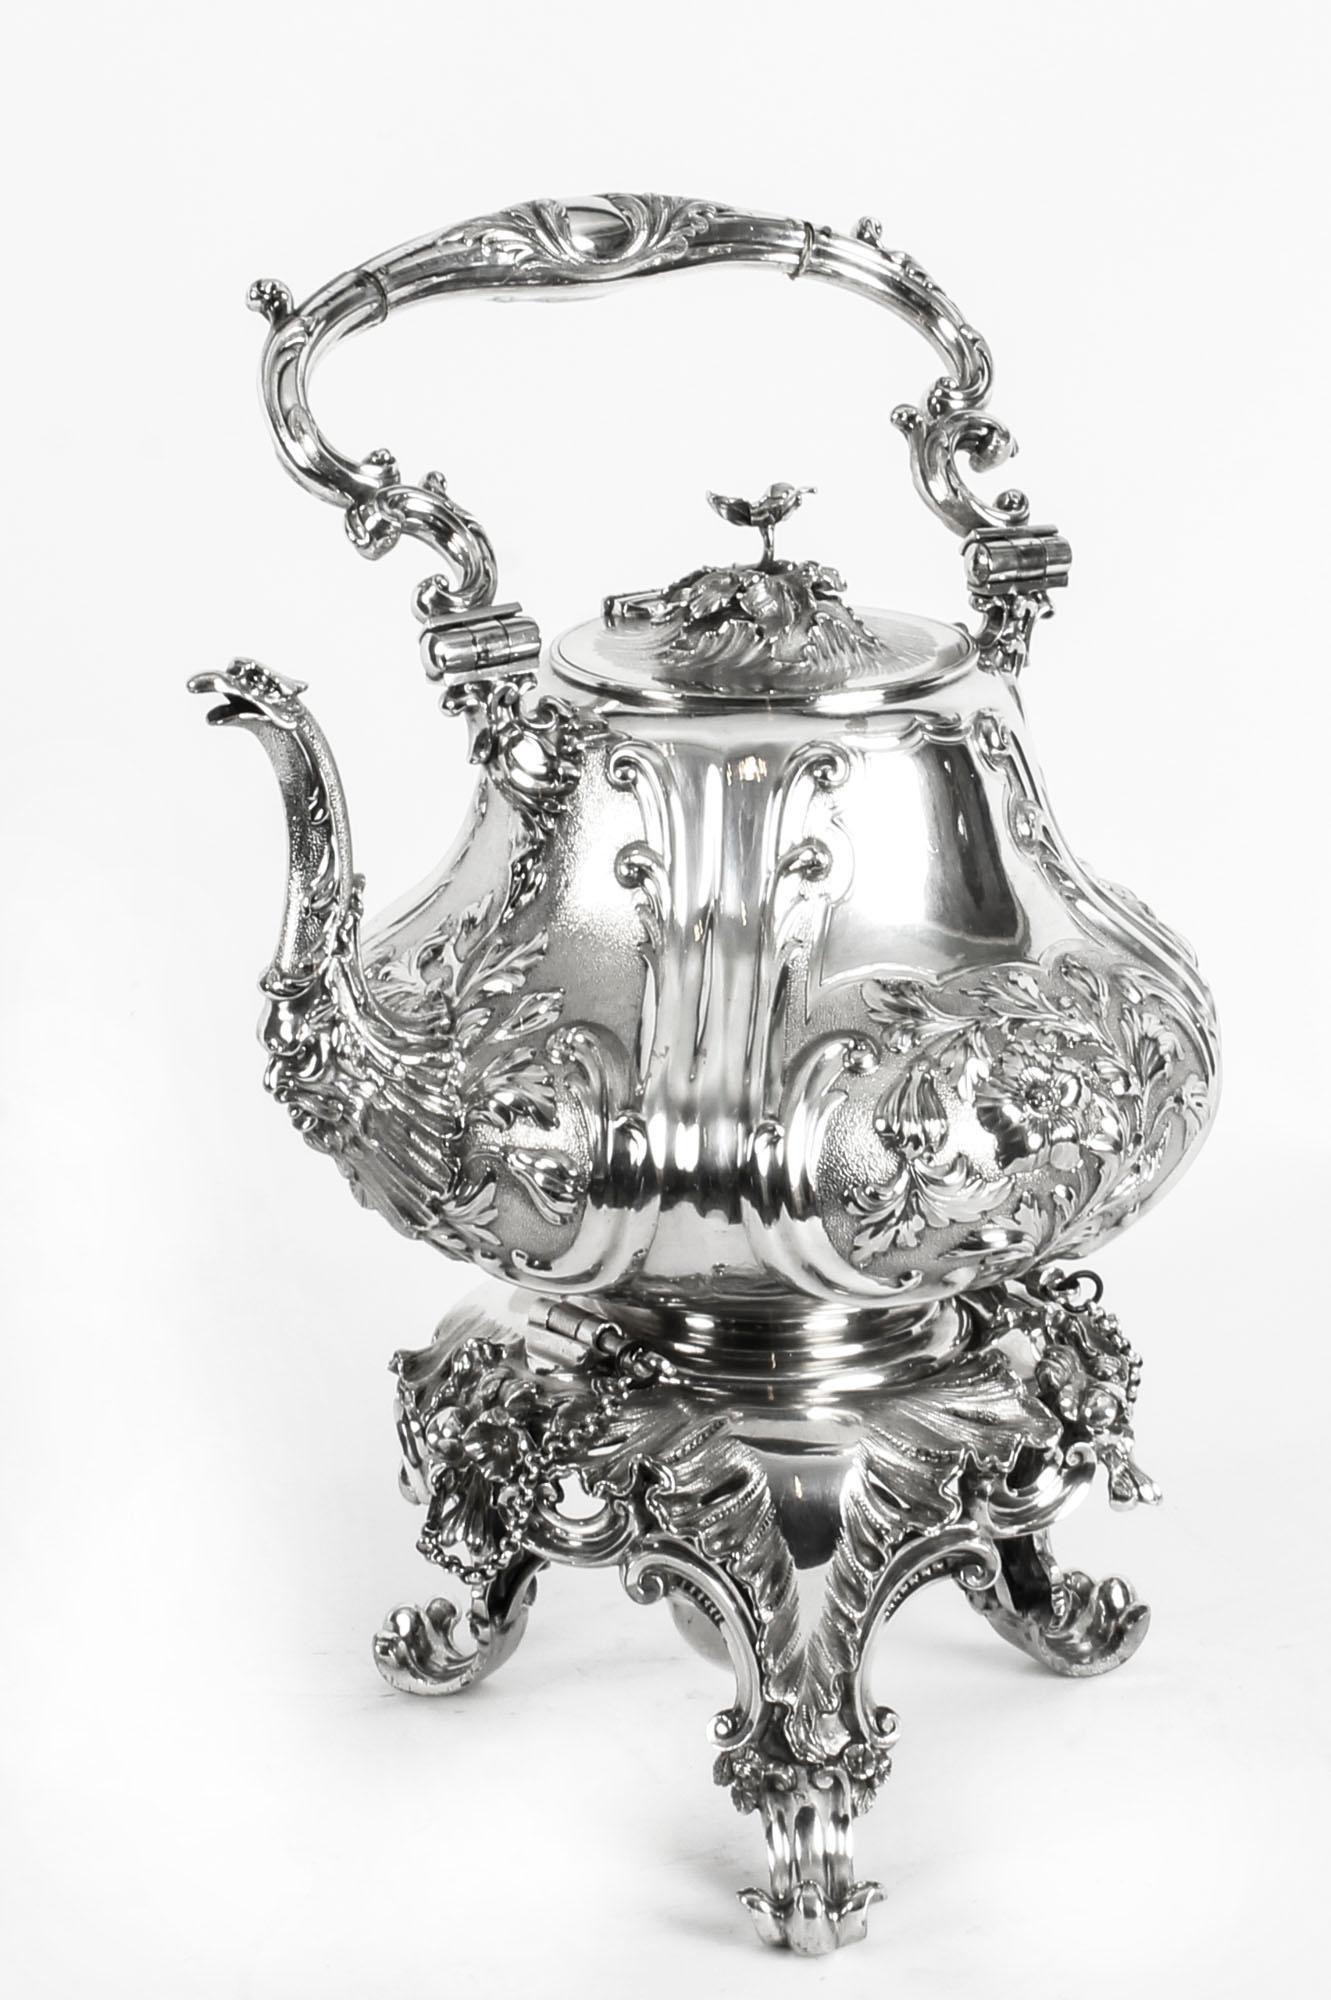 English Antique Silver Plate Spirit Kettle on Stand by Elkington, 19th Century